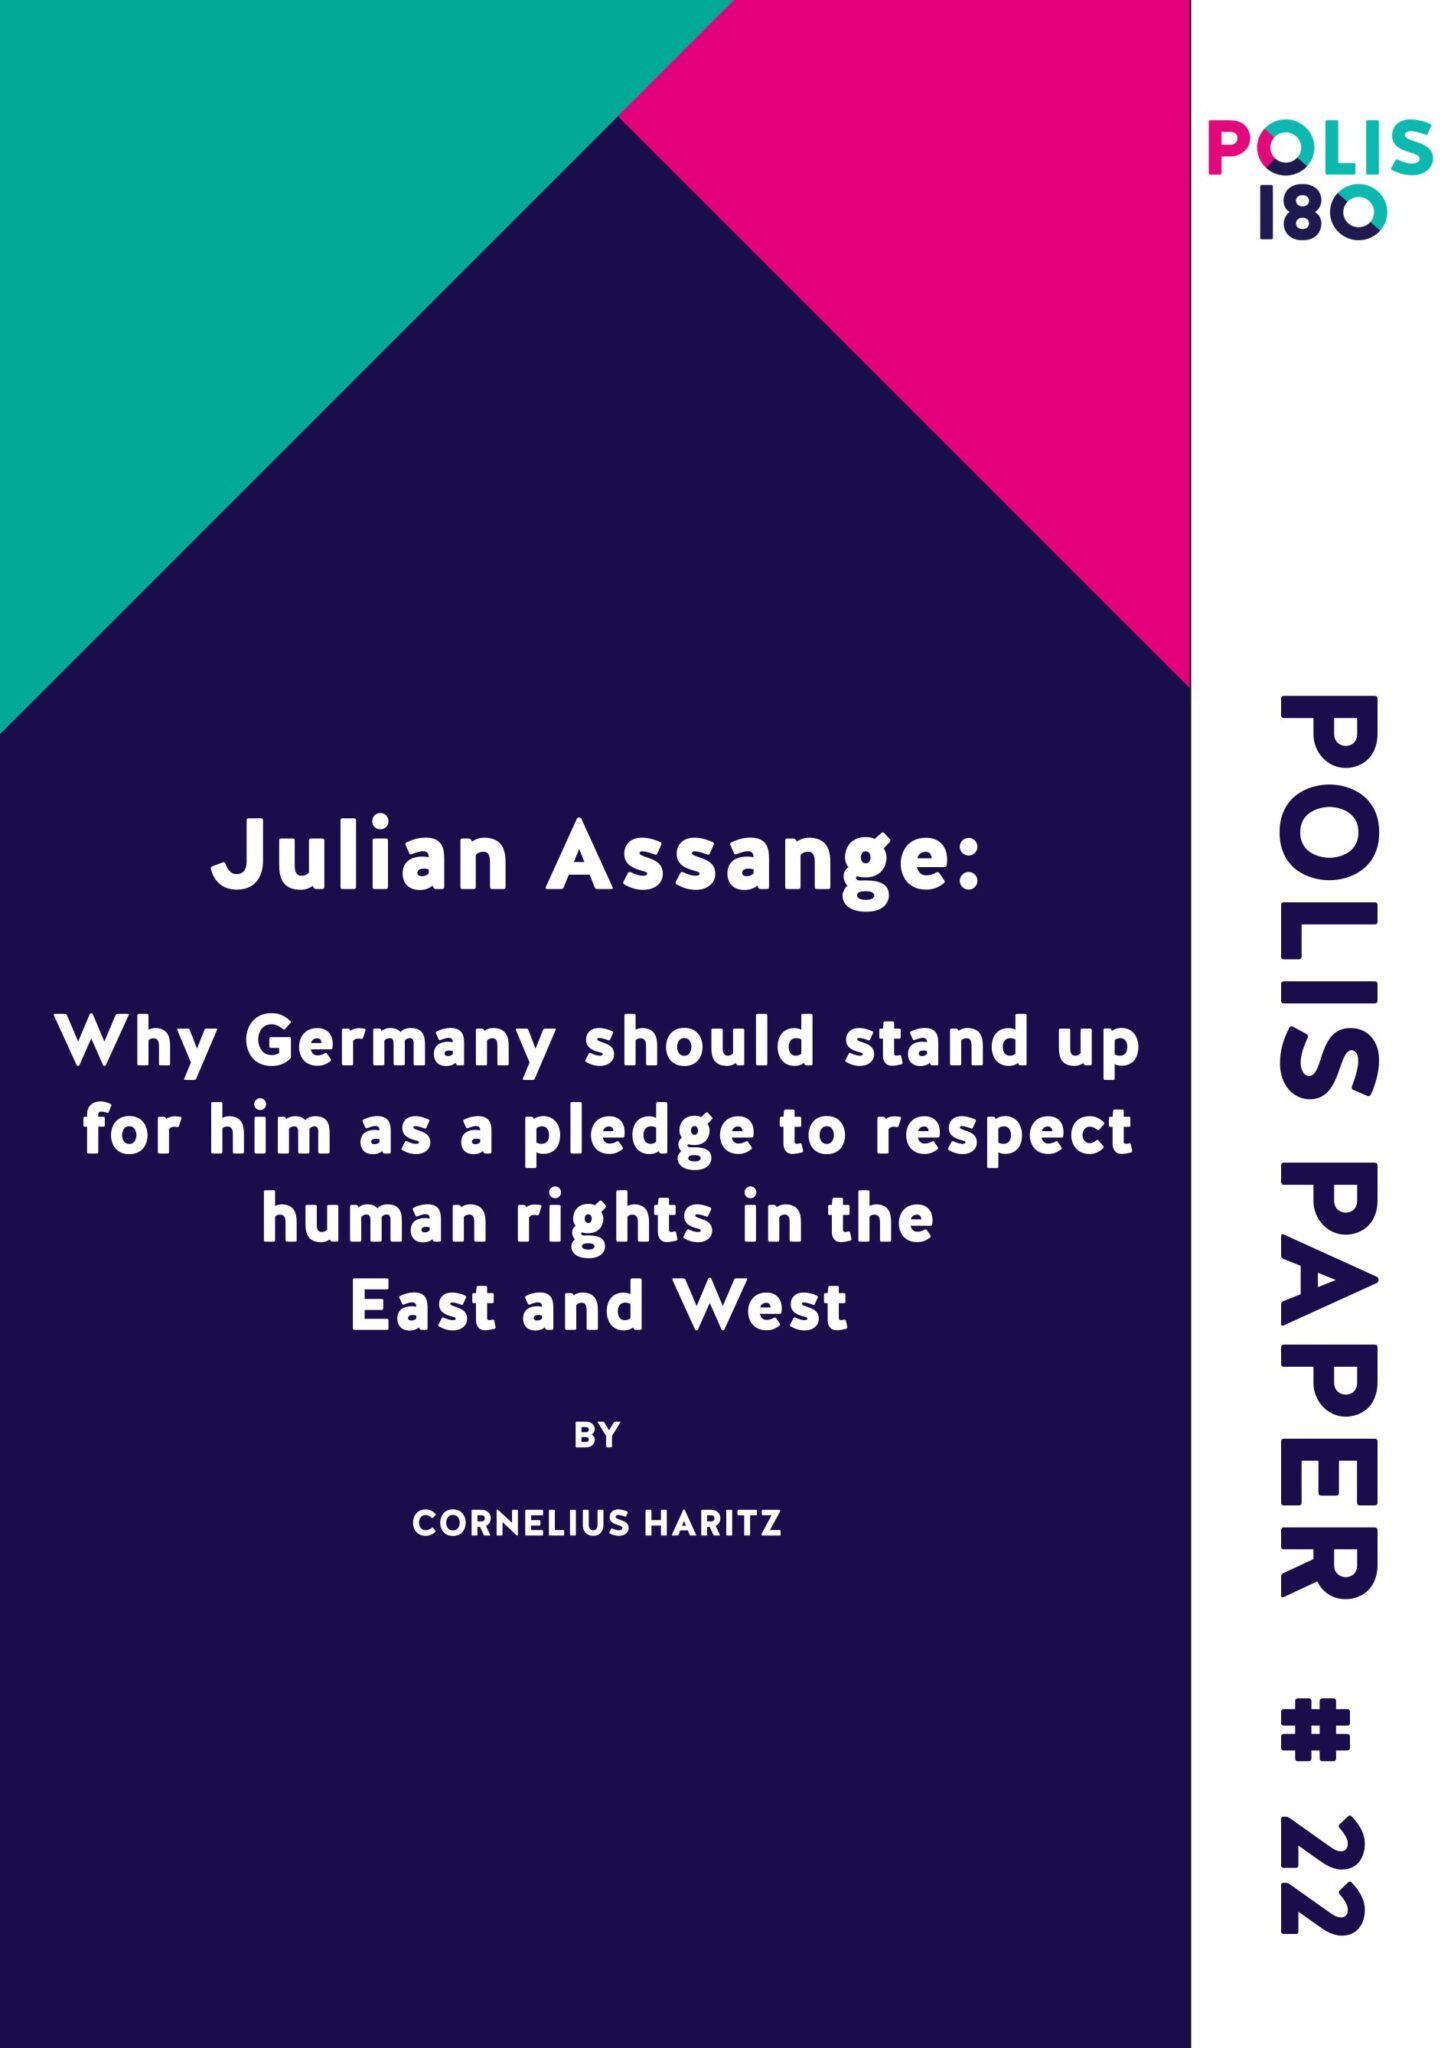 Polis Paper N° 22 - Julian Assange: Why Germany should stand up for him as a pledge to respect human rights in East and West